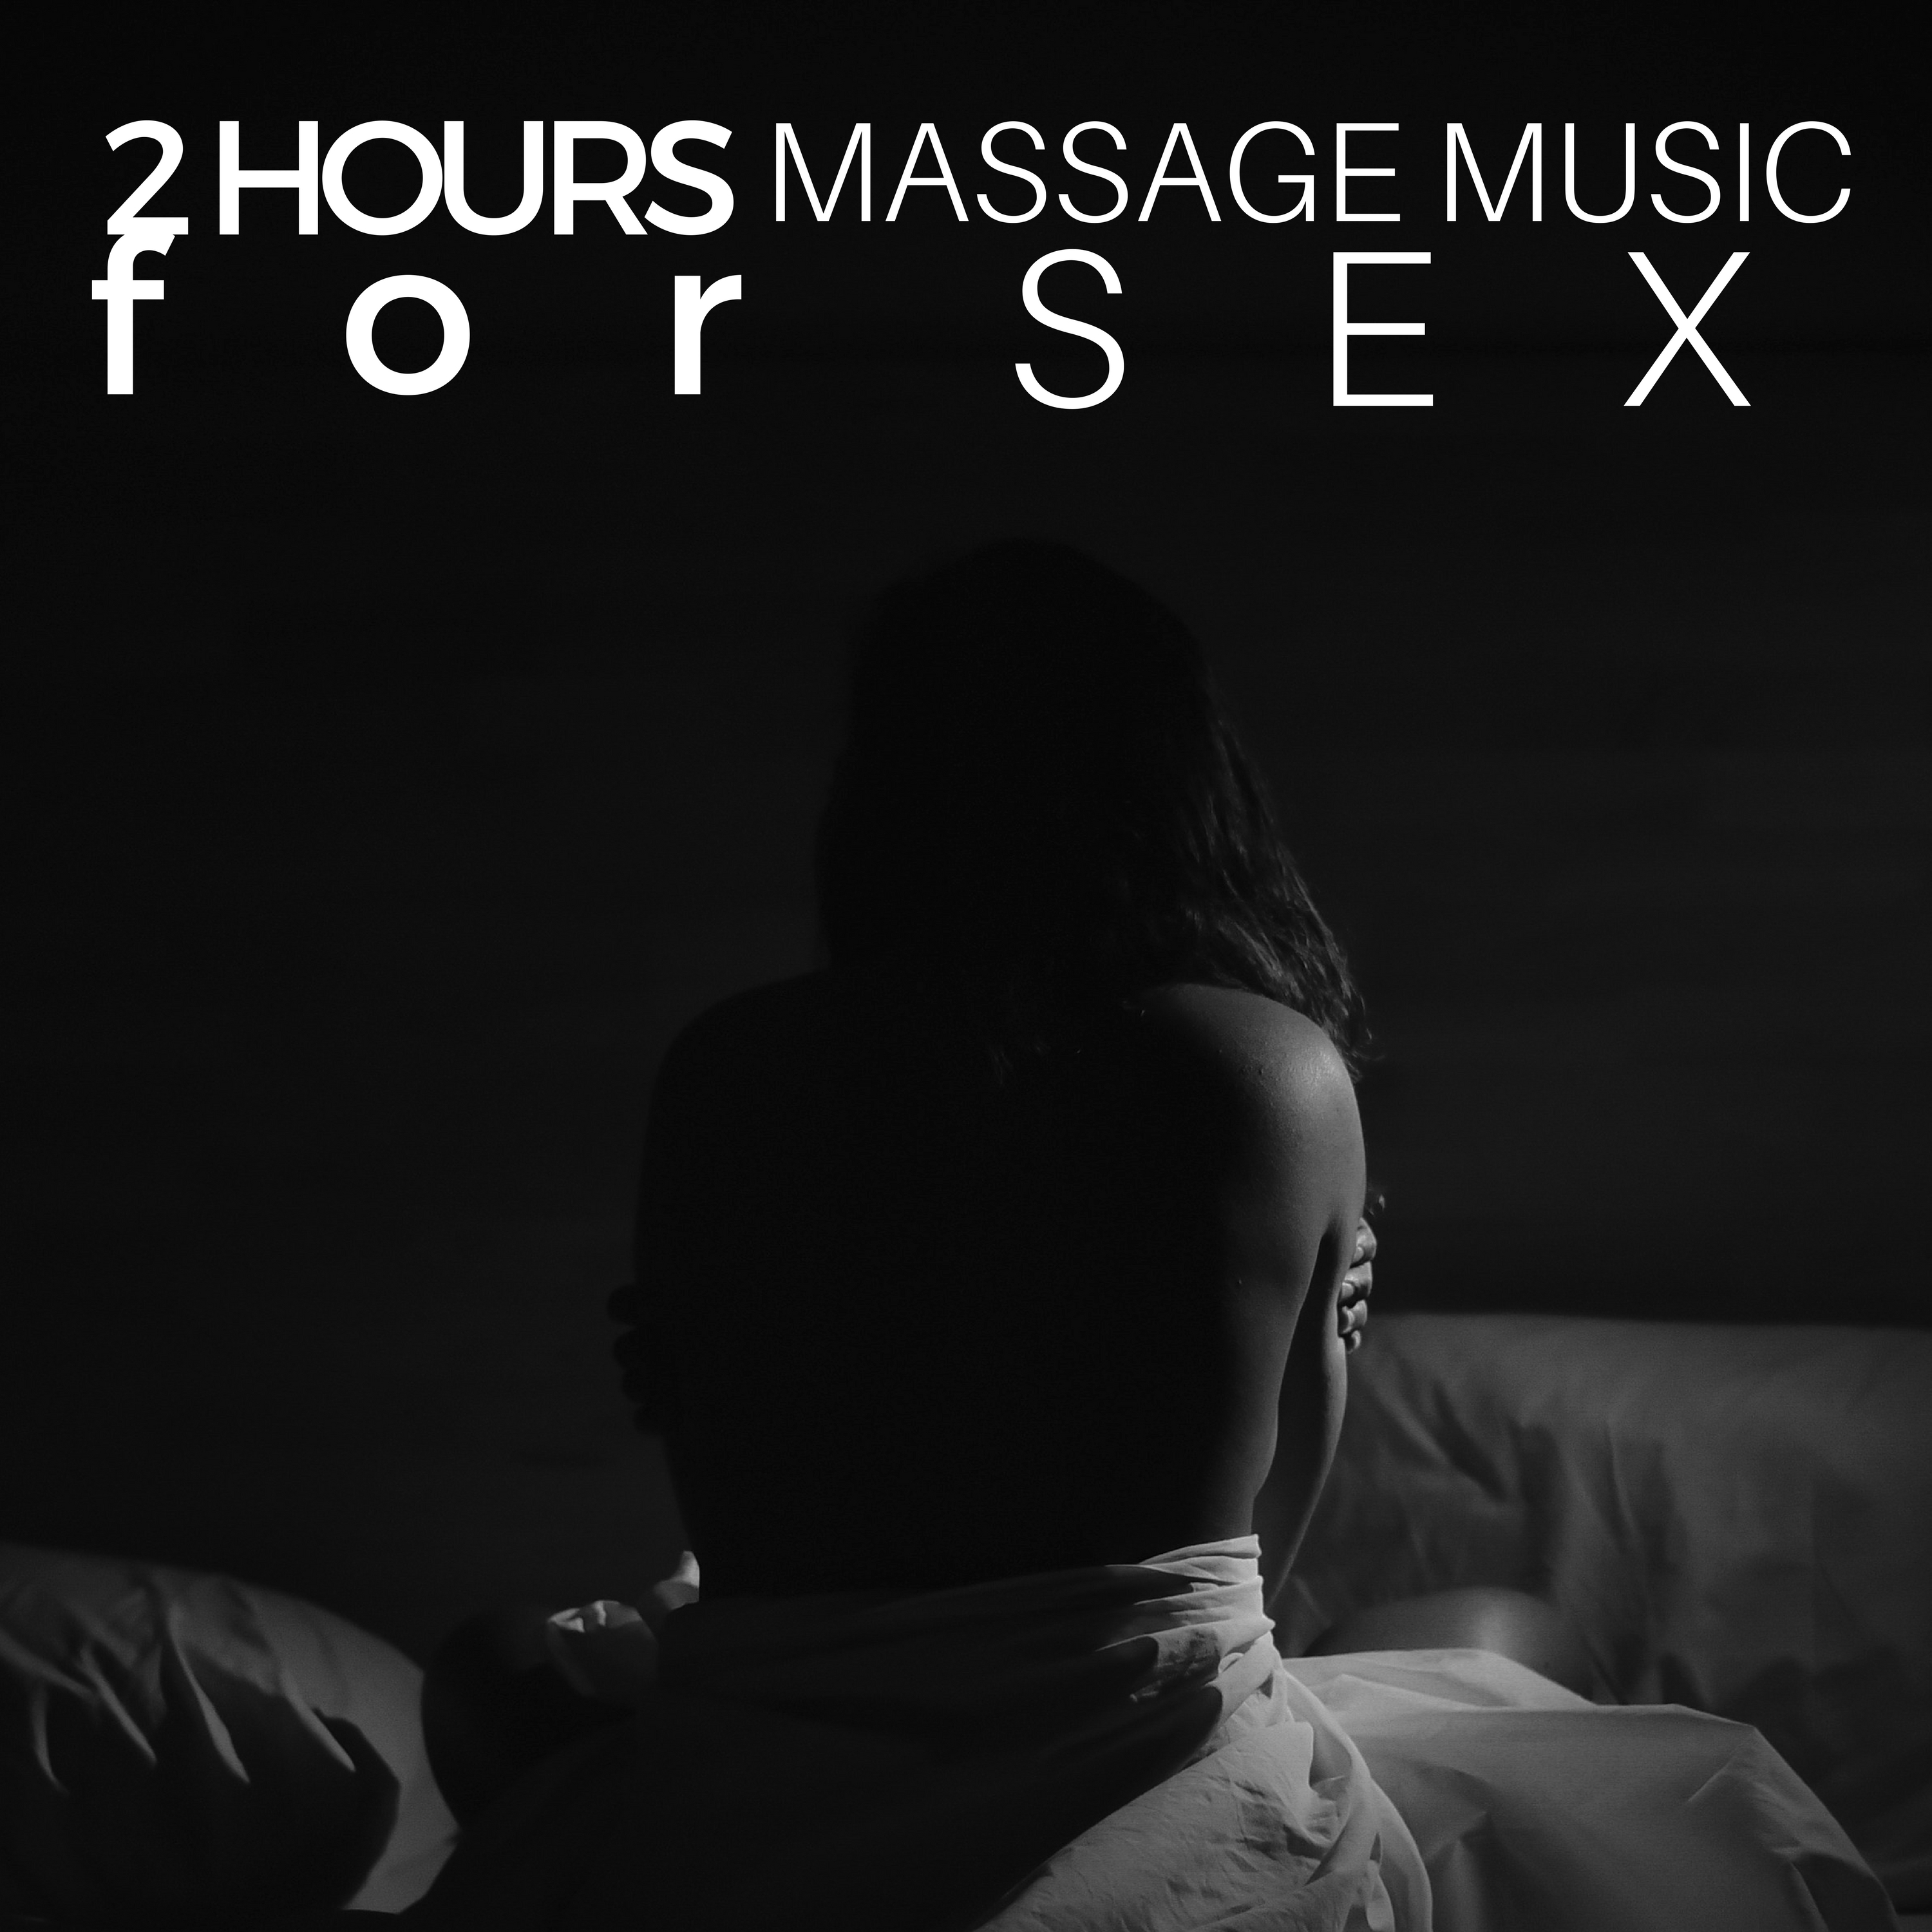 2 Hours Massage Music for ***